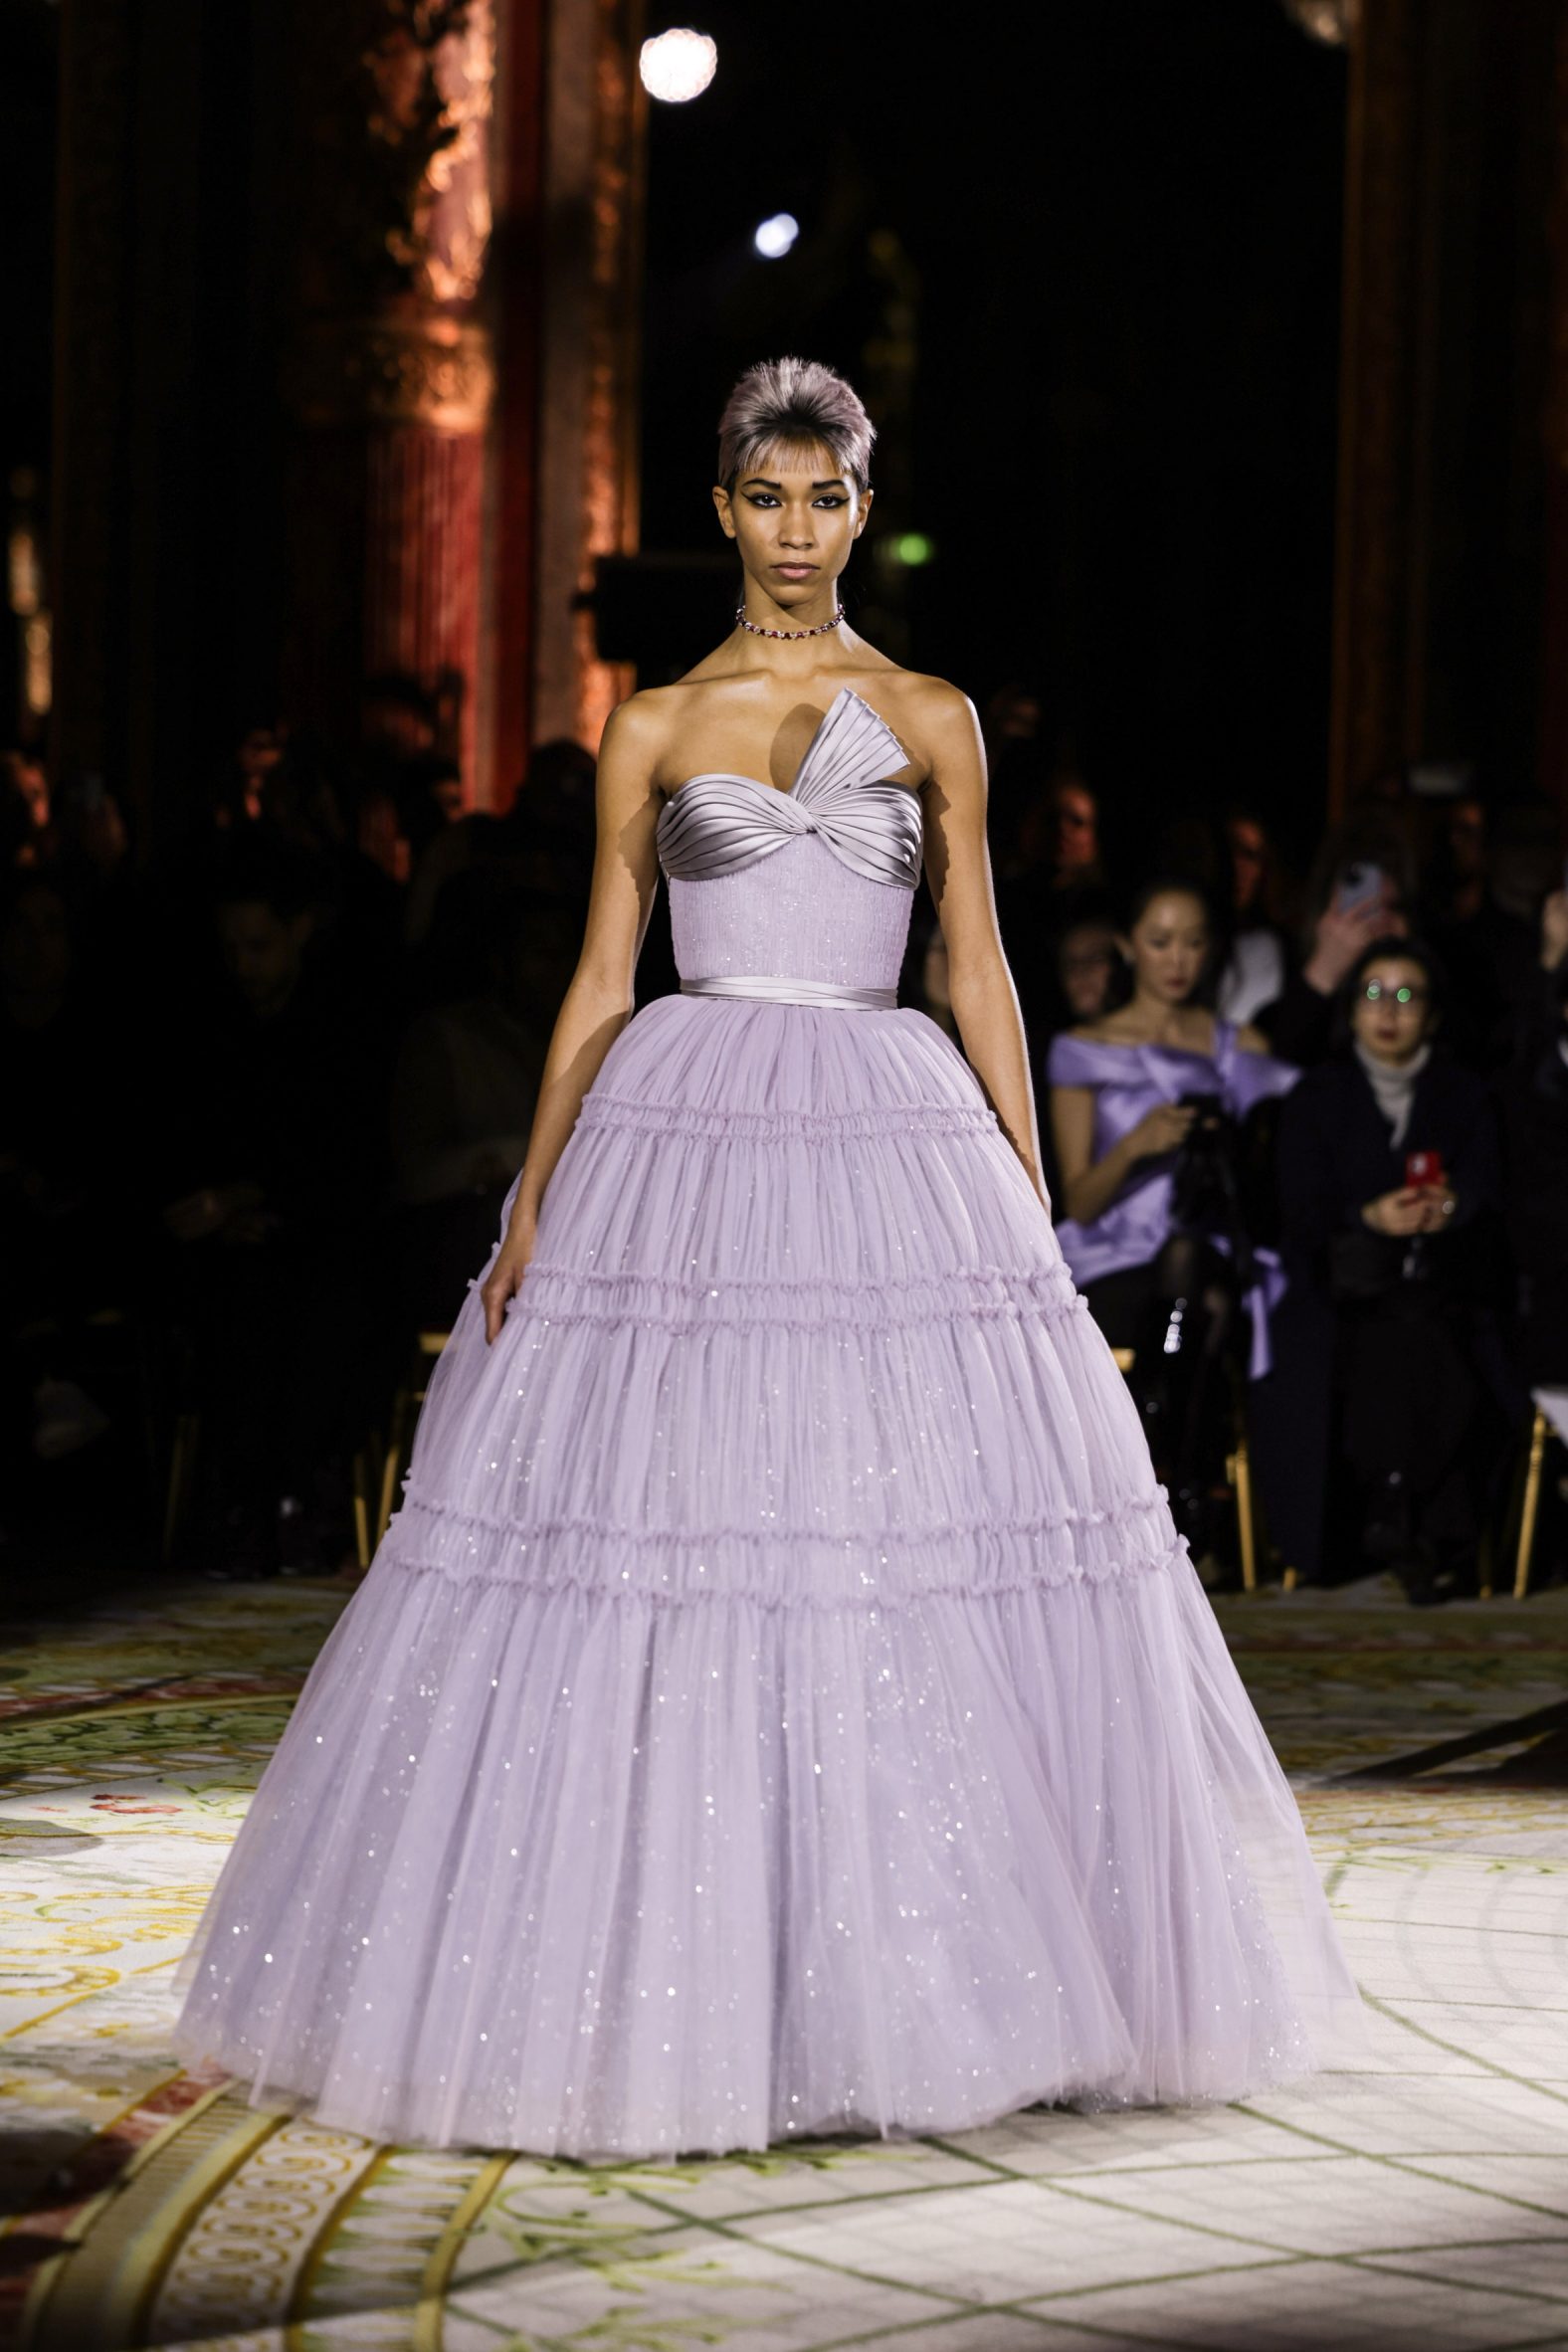 18 Dresses We Hope to See on Awards-Show Red Carpets in 2020 | Vogue